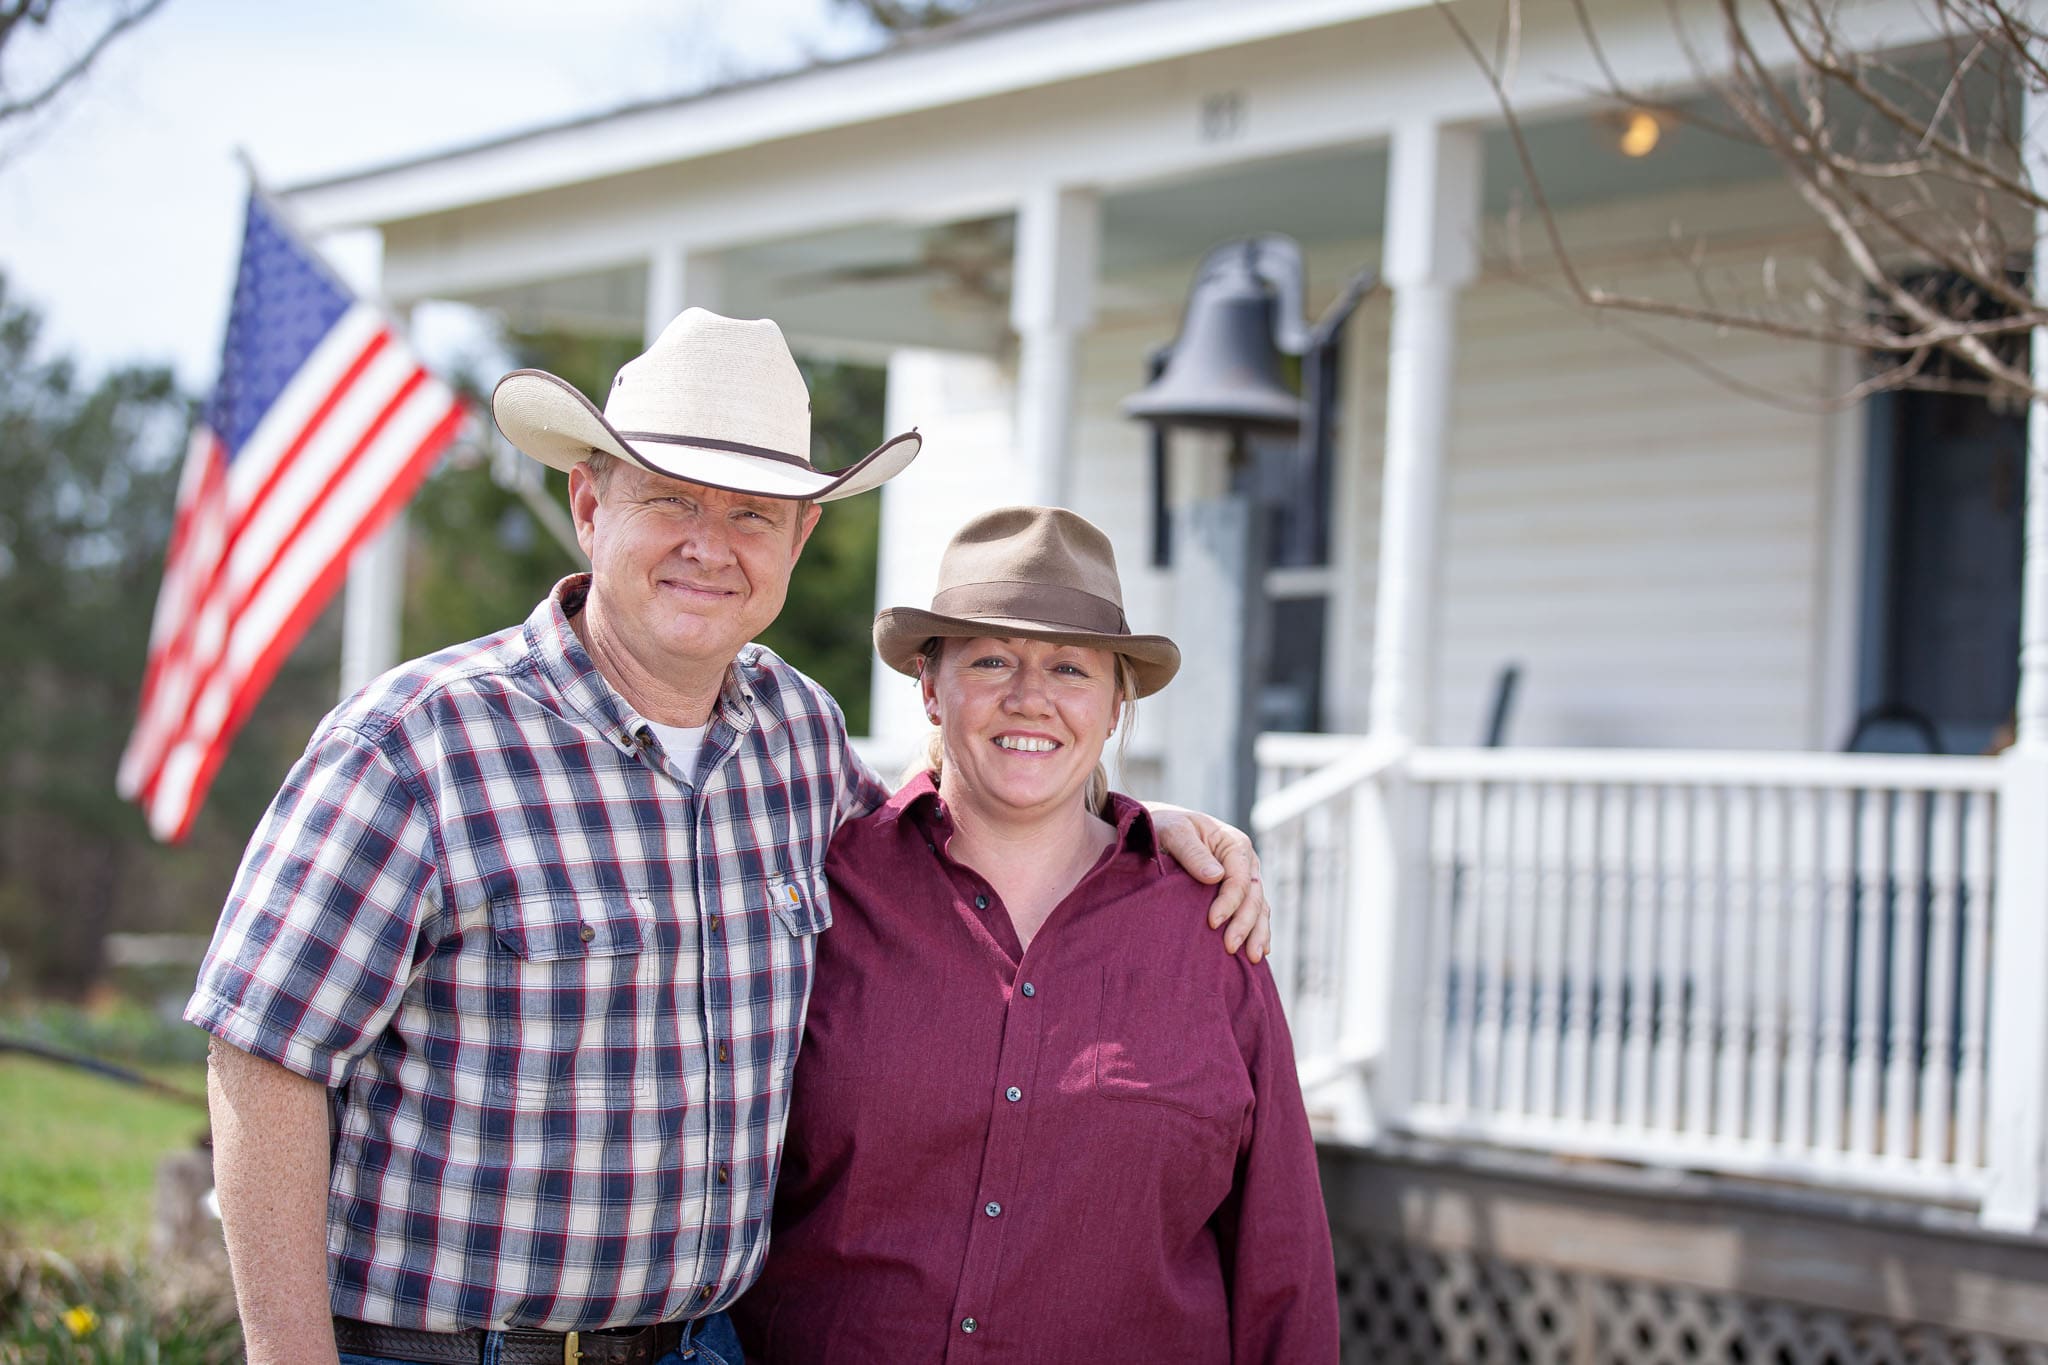 Georgia-State-Representative-and-helicopter-pilot-David-Jenkins-and-his-wife-Cat-standing-in-front-of-their-farmhouse-with-an-American-flag-in-the-background